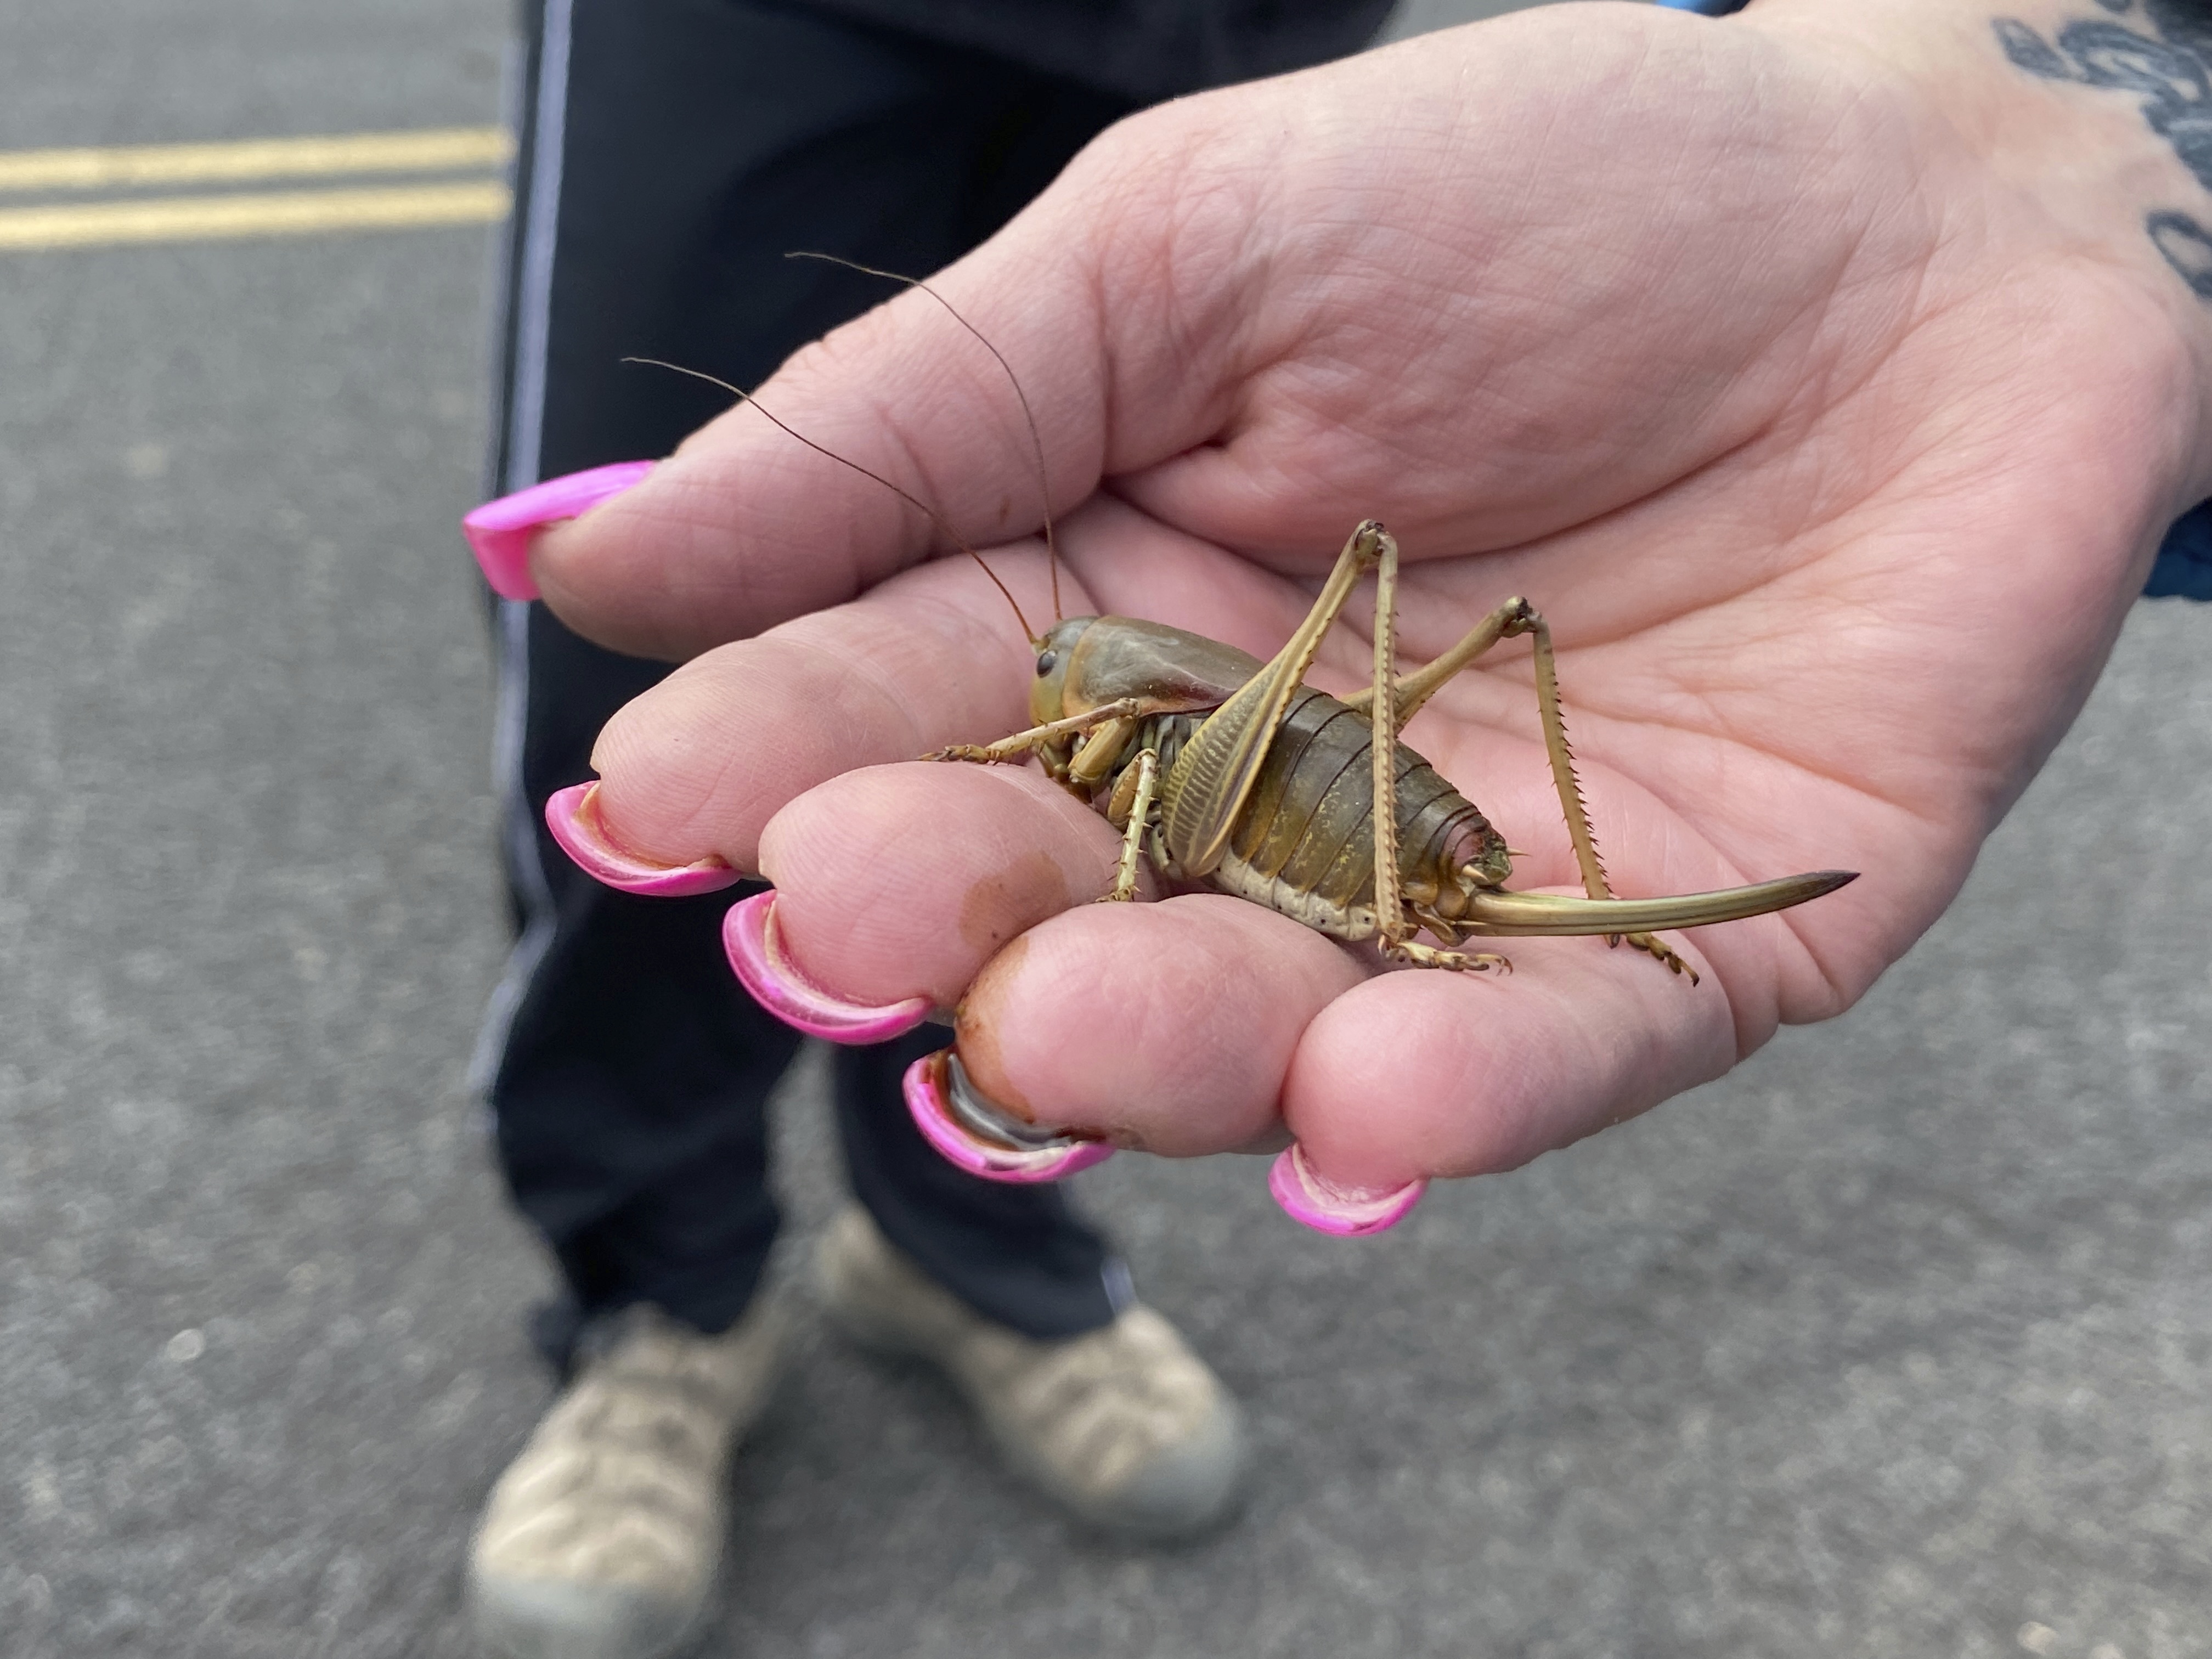 Eastern Oregon faces down giant swarms of crickets with volunteers — and goats